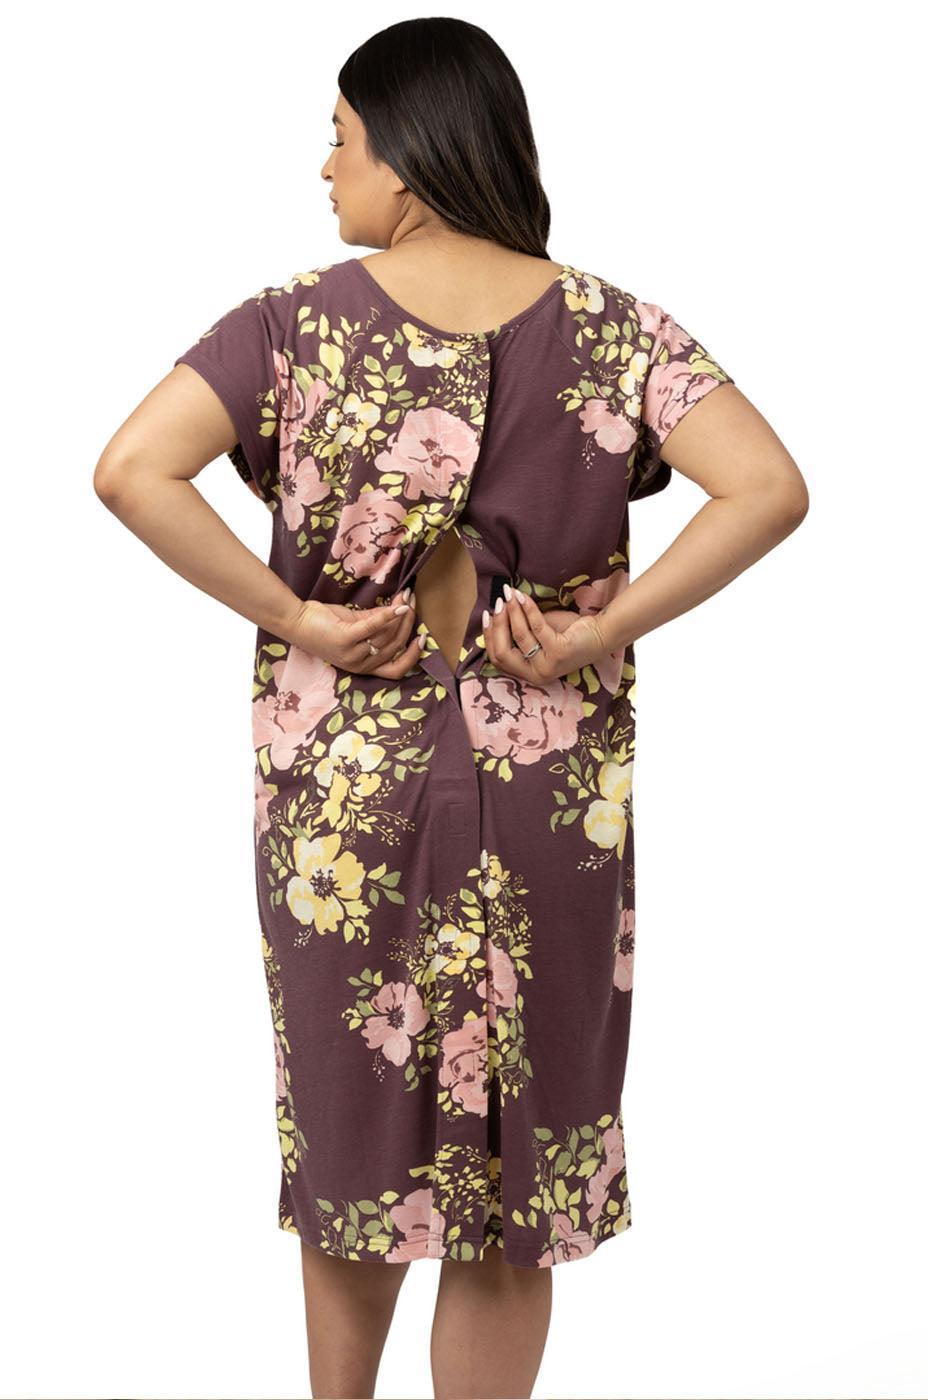 Universal Labor and Delivery Gown in Burgundy Plum Floral – Milk